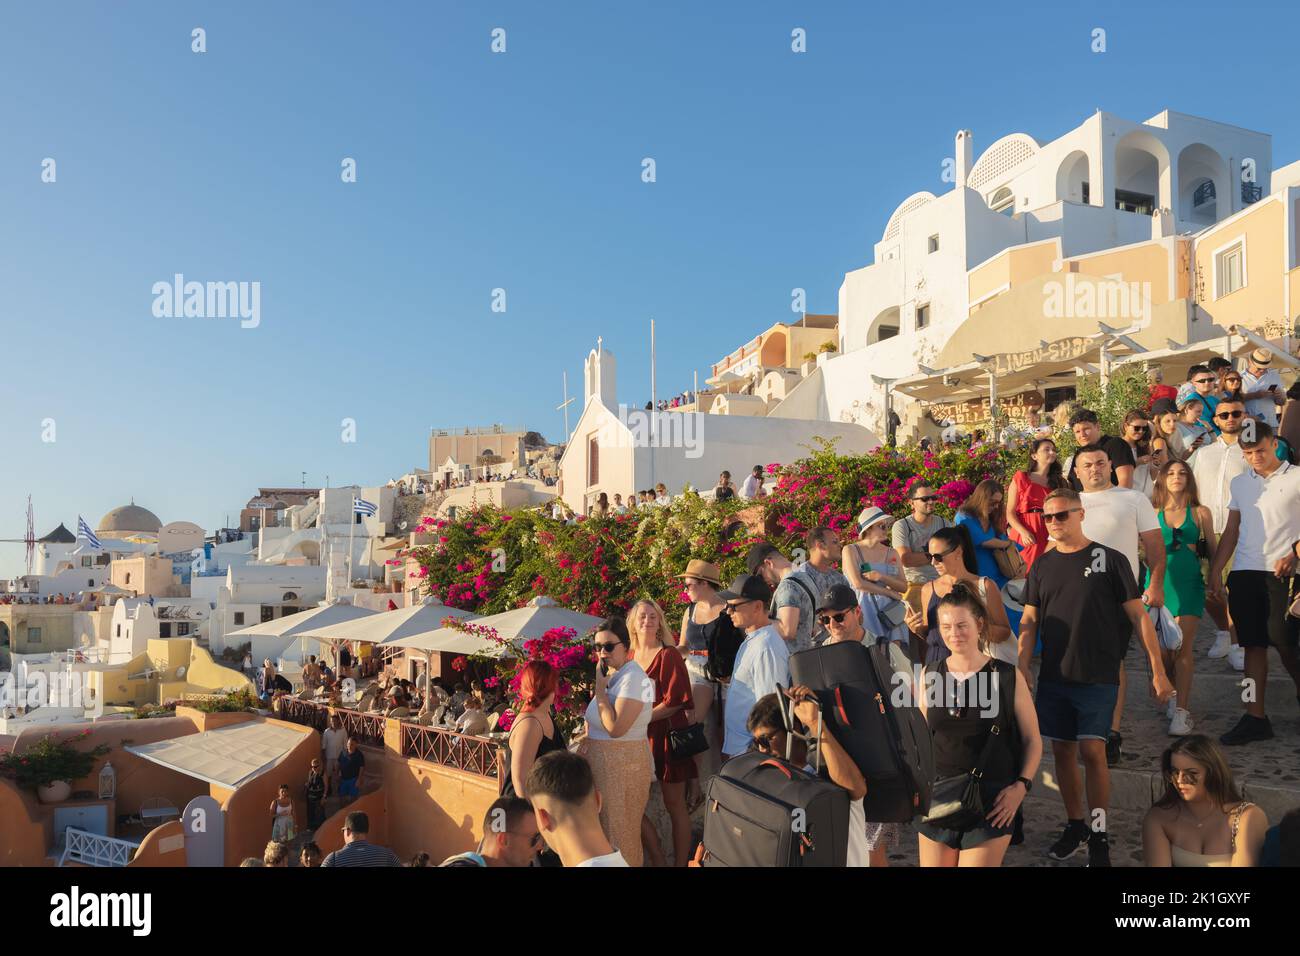 Oia, Greece - September 11, 2022: Narrow, overcrowded and cogested streets in Oia, Santorini filled with a crowd of tourists during summer high season Stock Photo